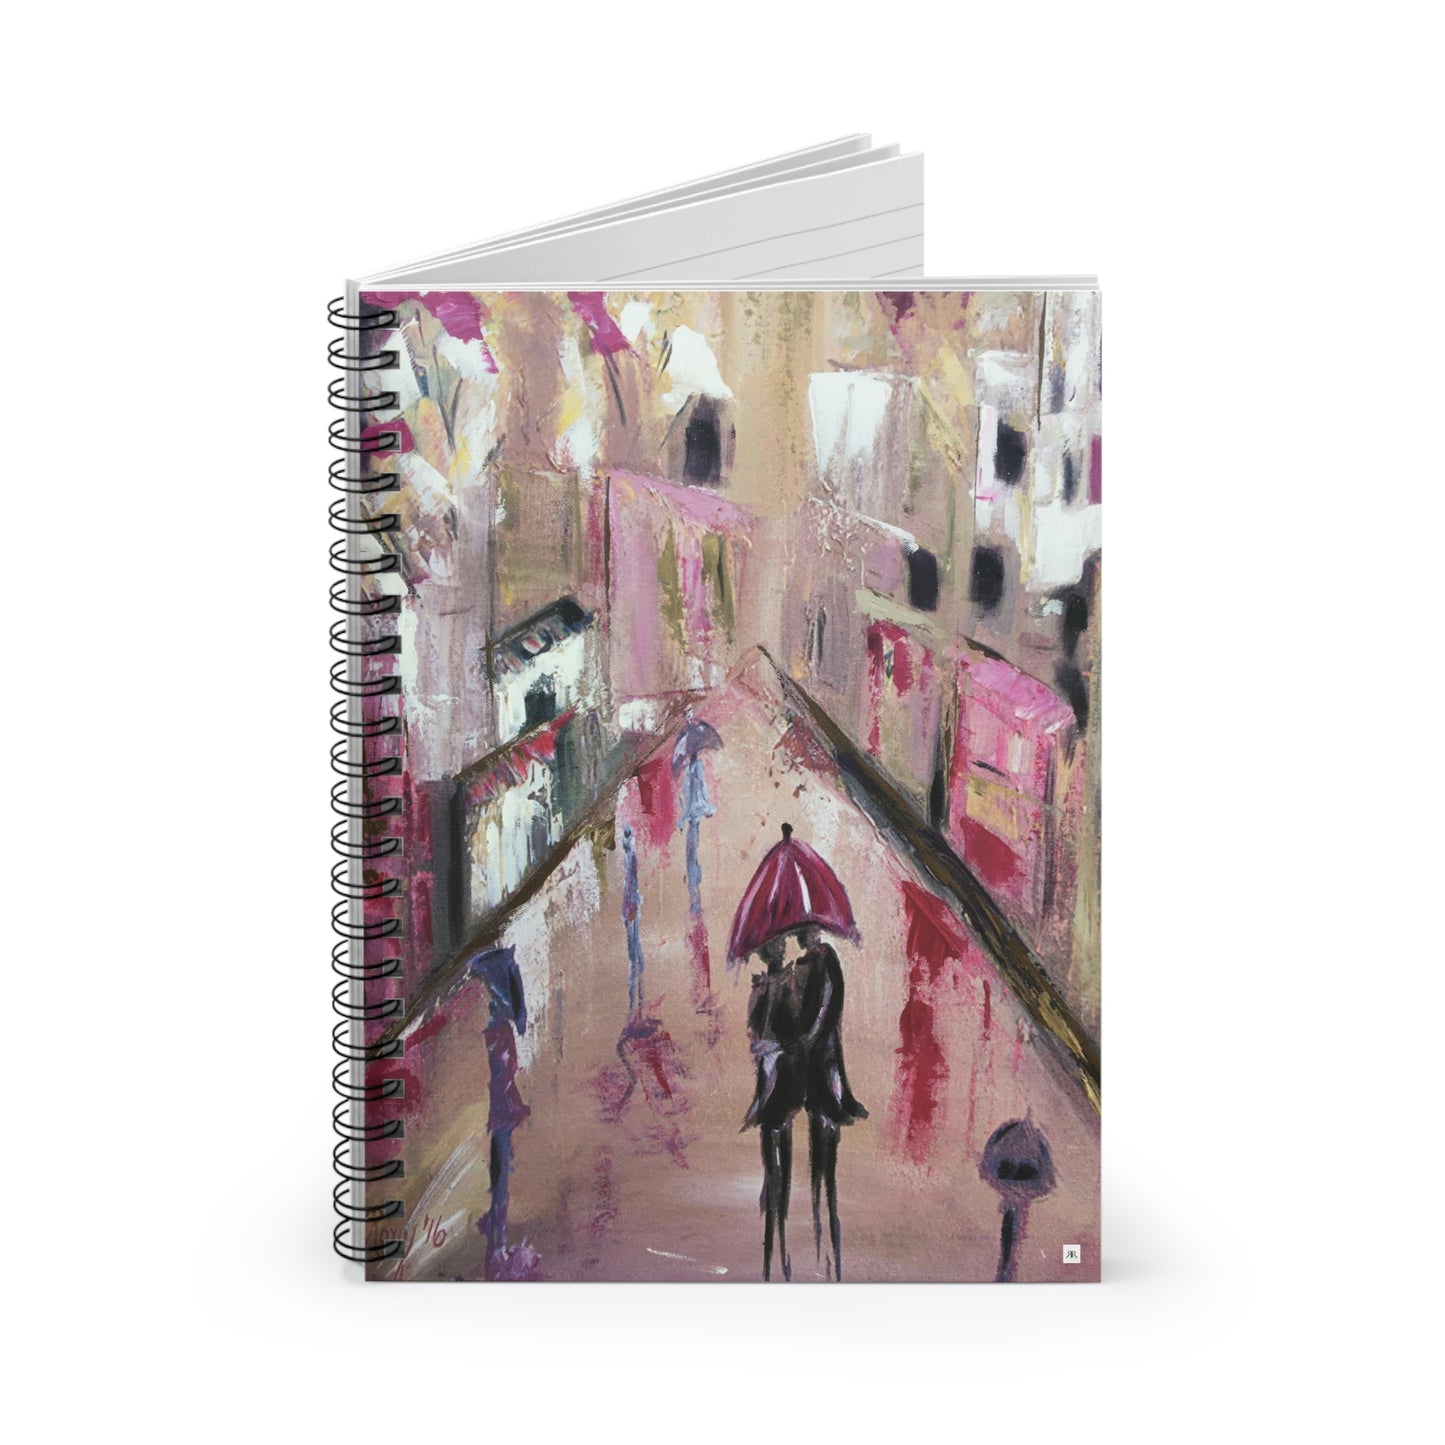 Romantic Couple "Lucky in Love" Spiral Notebook